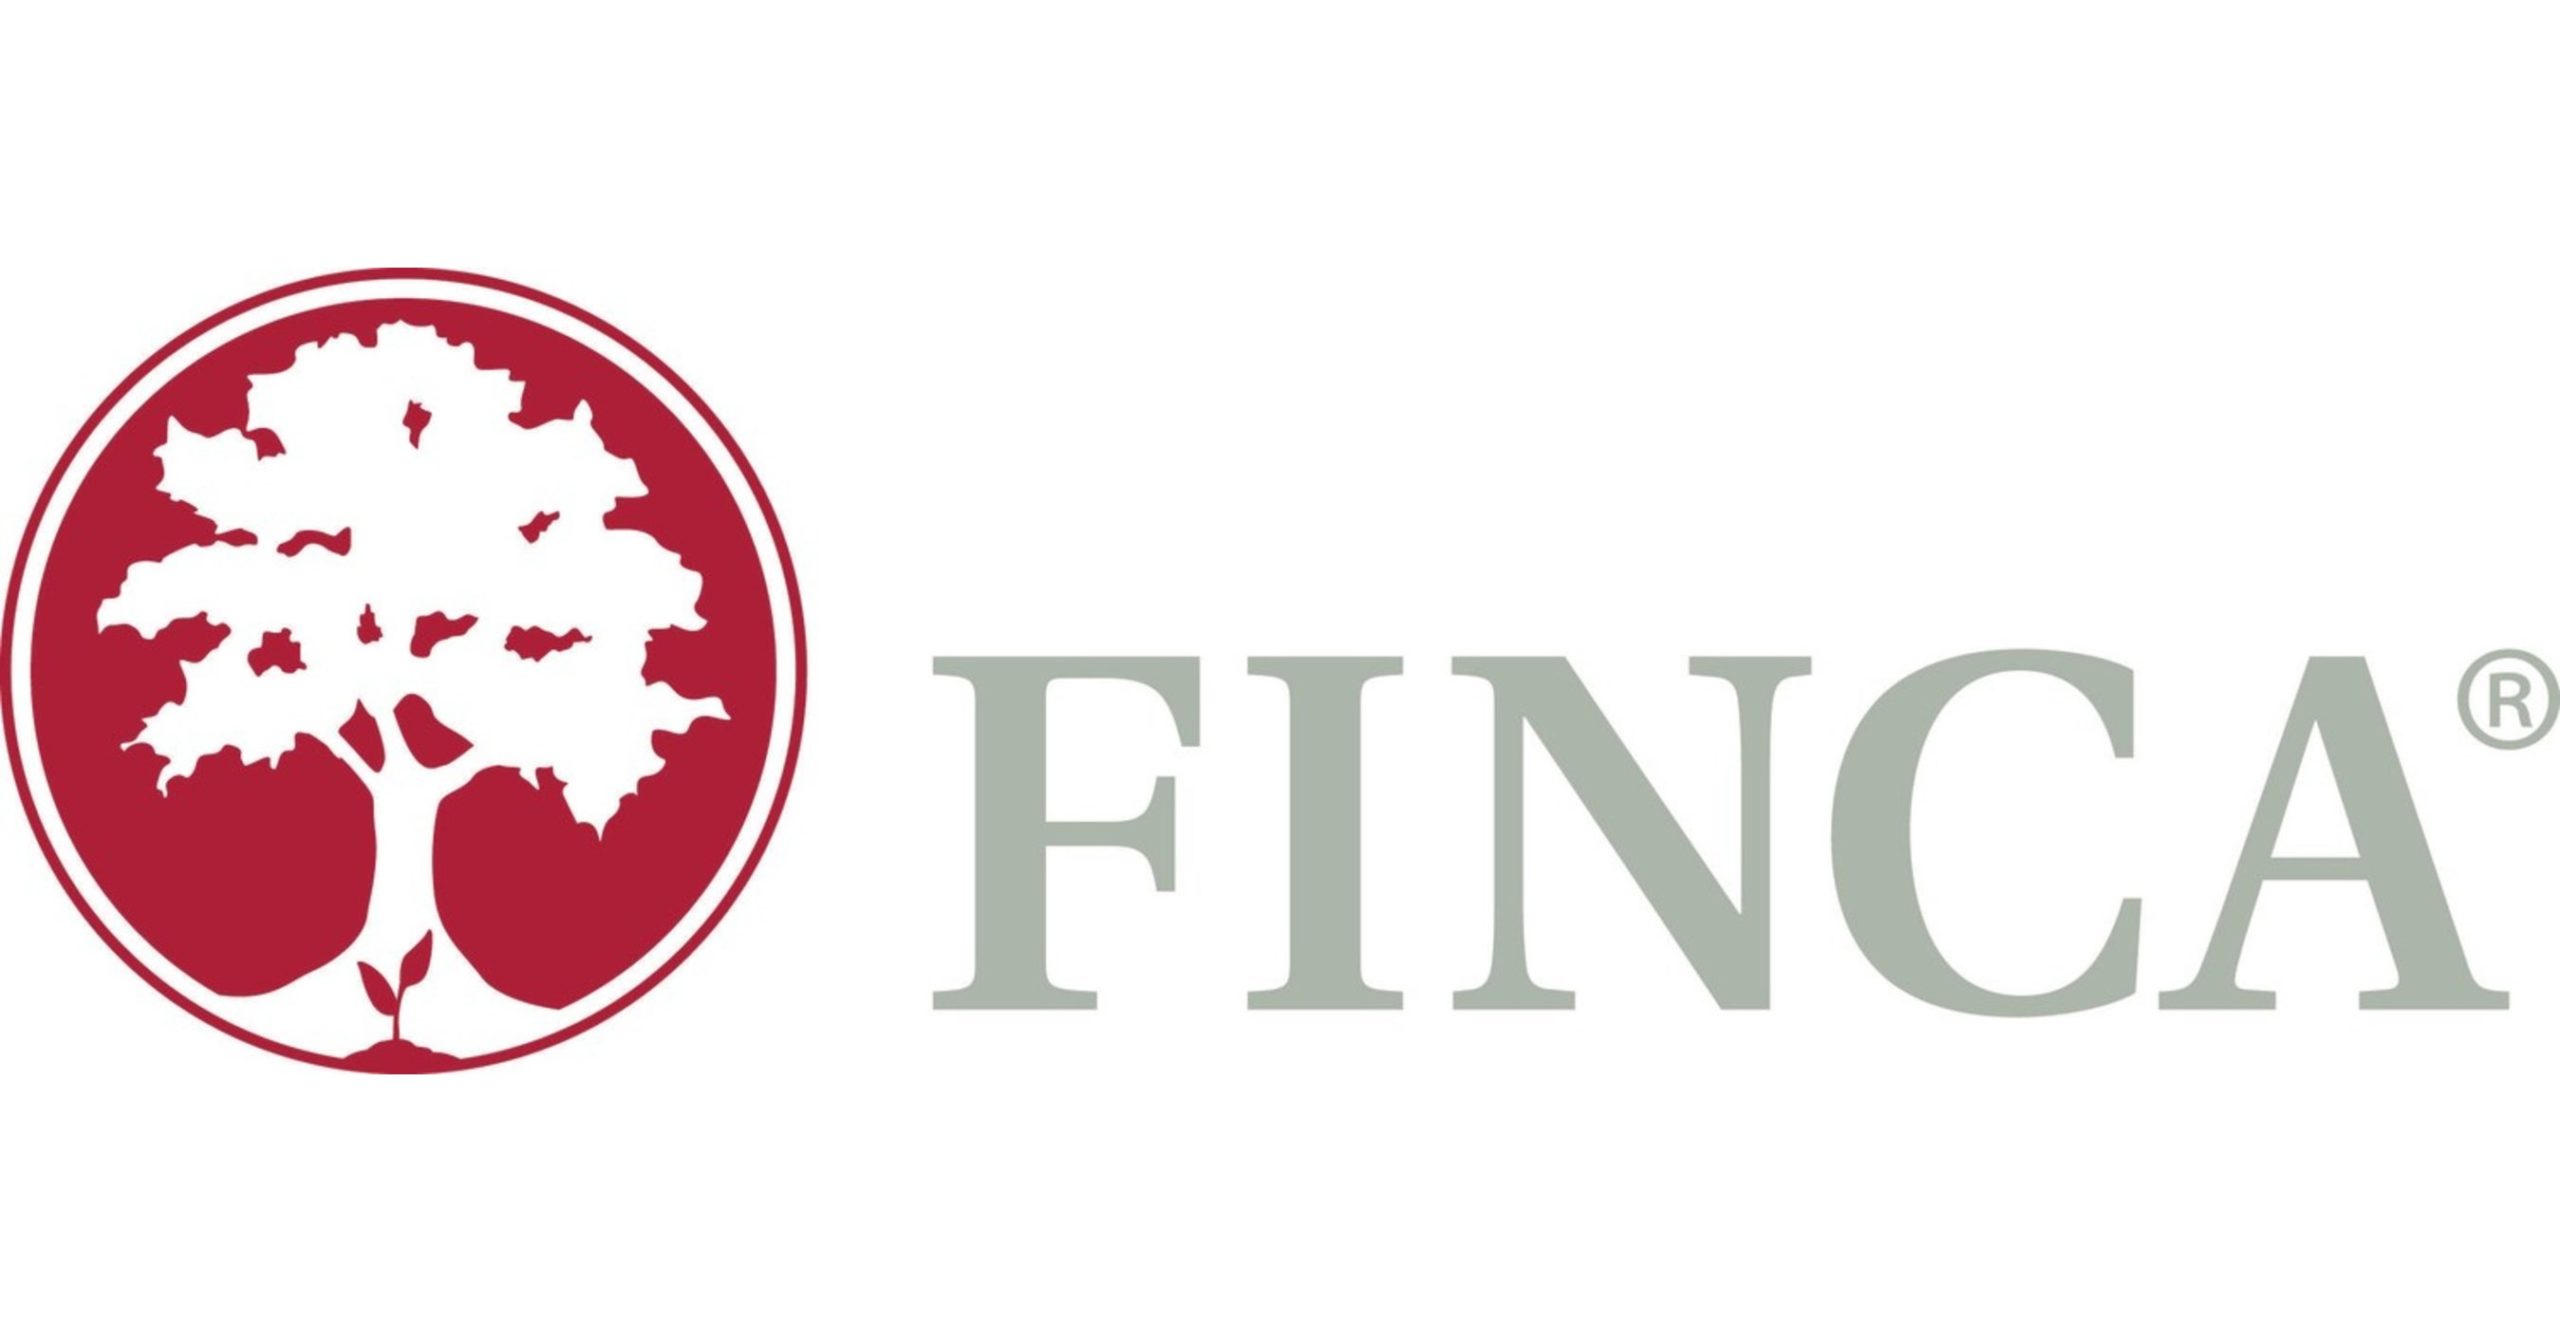 FINCA's mission is to alleviate poverty through lasting solutions that help people build assets, create jobs and raise their standard of living. (PRNewsfoto/FINCA International)